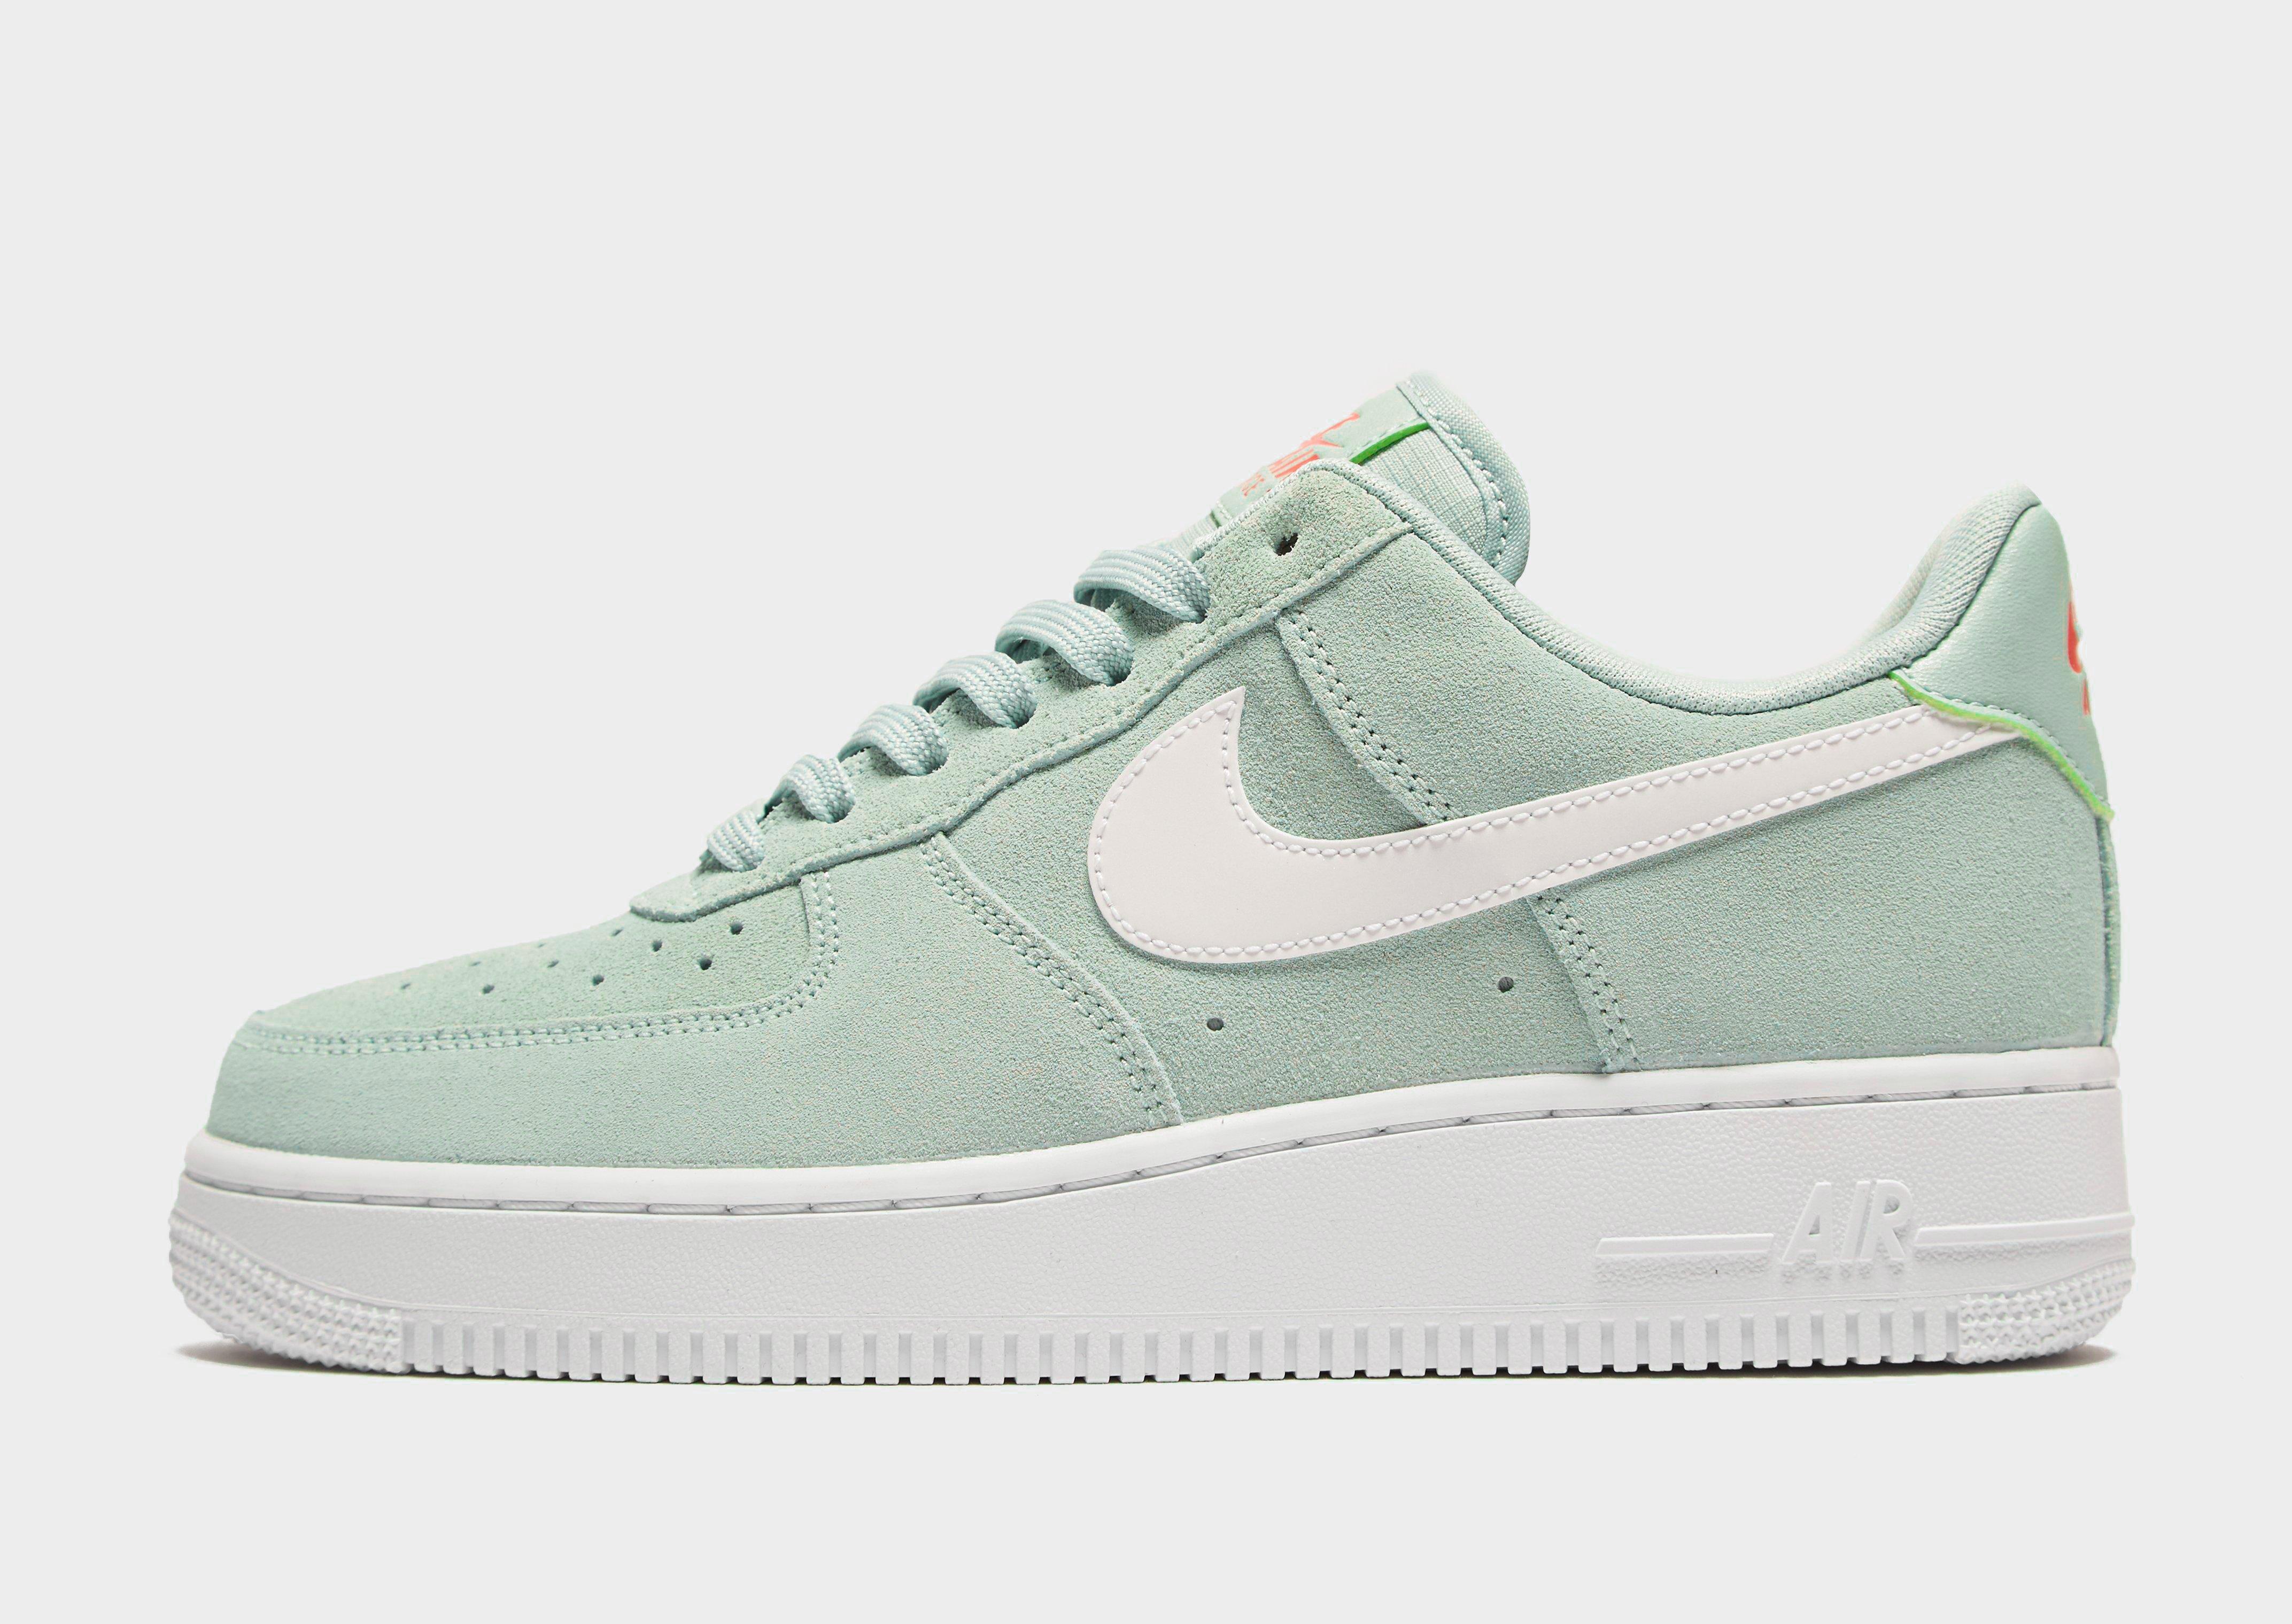 nike air force 1 07 lv8 verde factory outlet e35f1 1c363